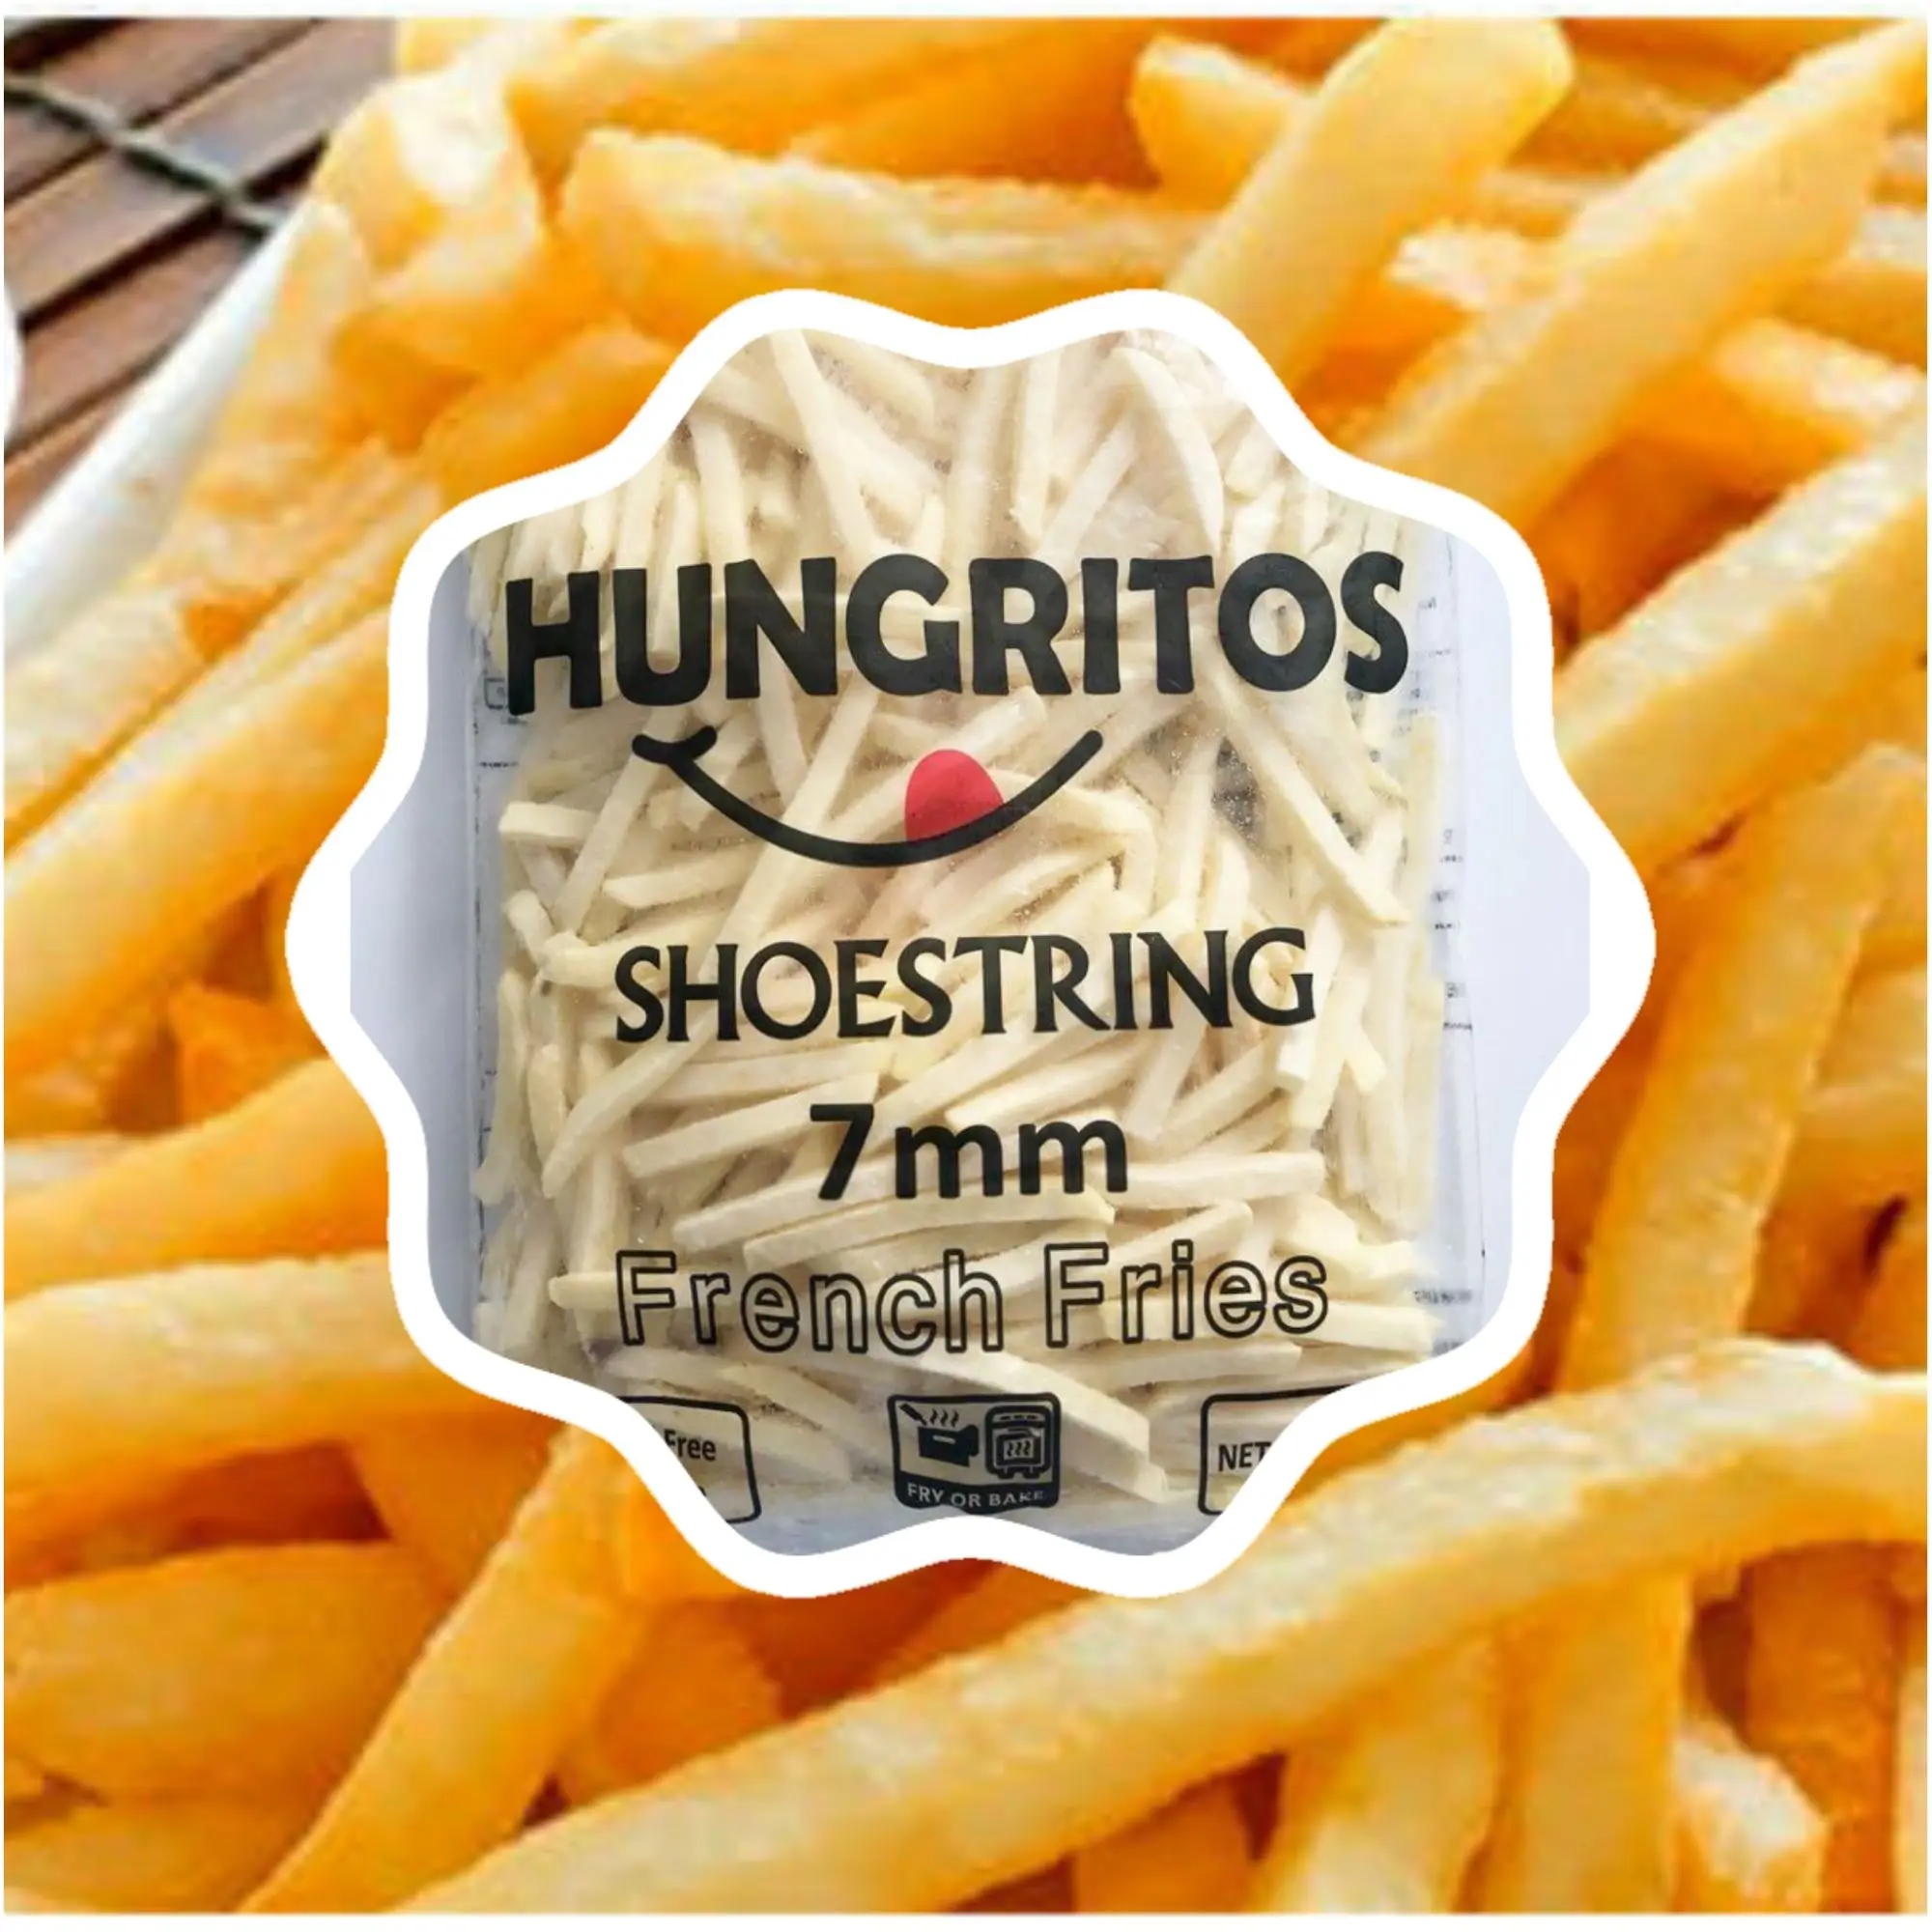 Hungritos Shoestring 7mm French Fries 1kg frozen